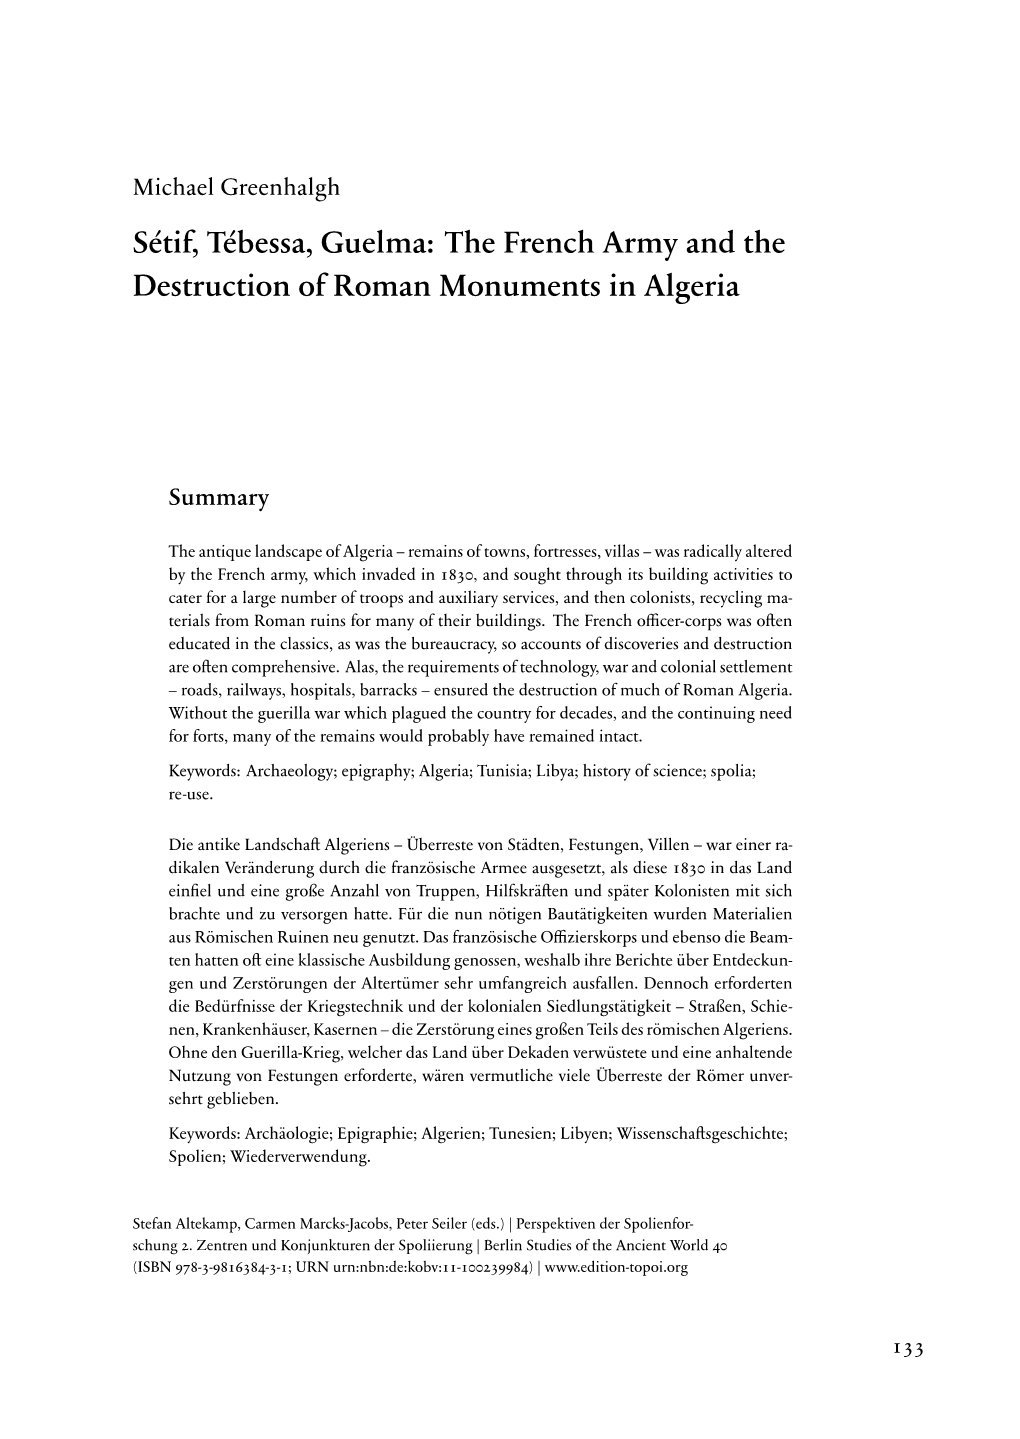 Sétif, Tébessa, Guelma: the French Army and the Destruction of Roman Monuments in Algeria